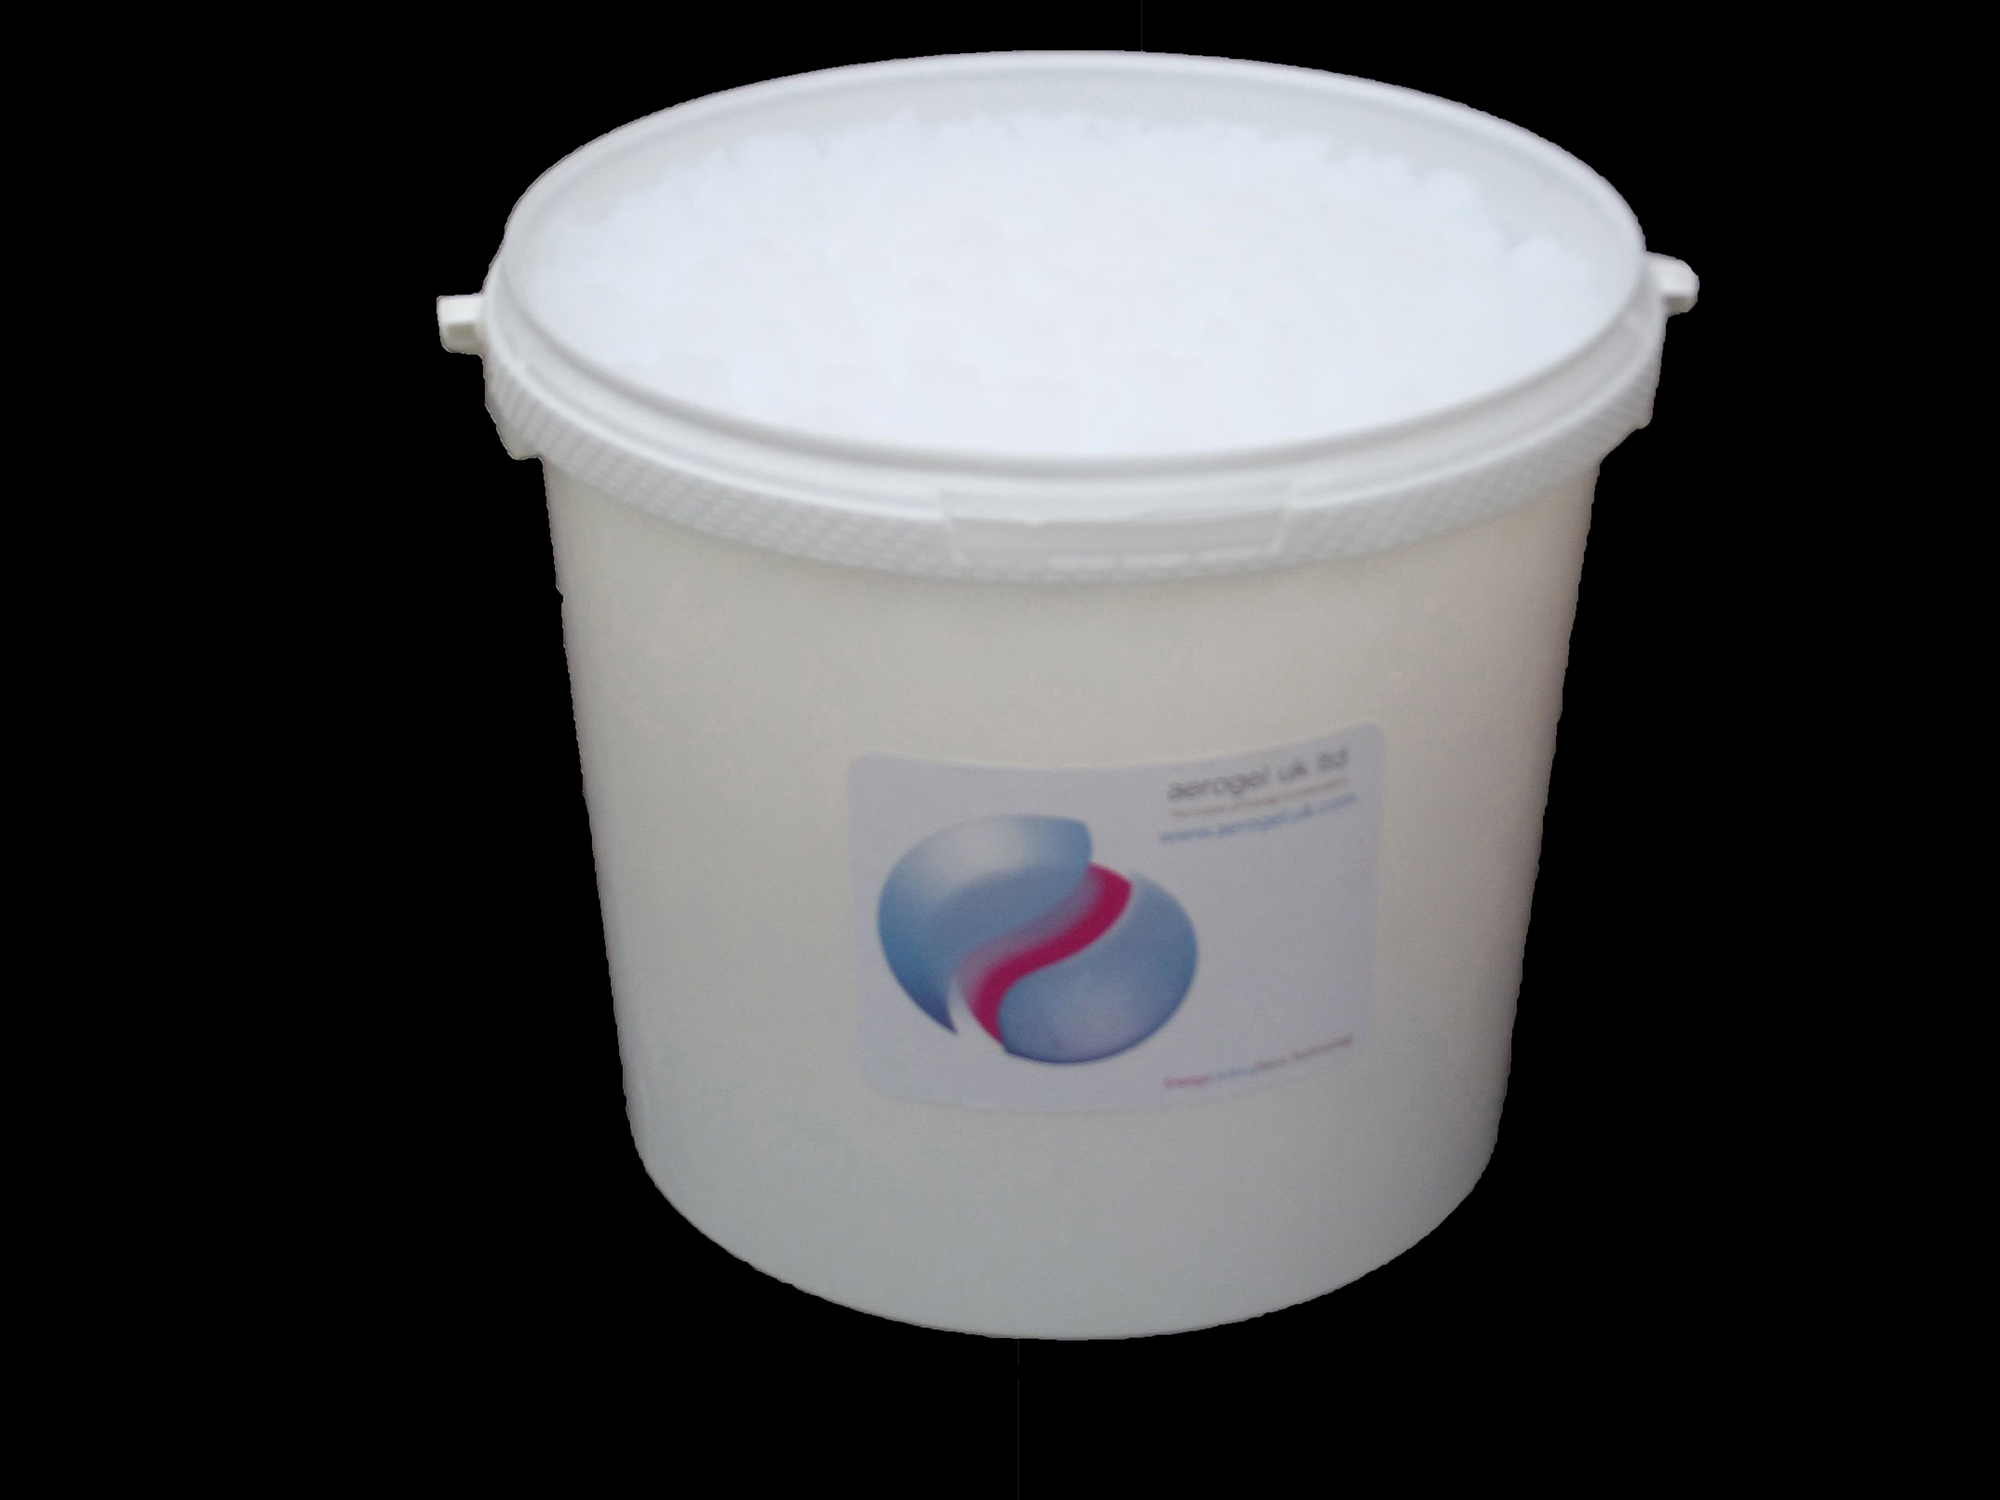 aerogel uk granules in a container